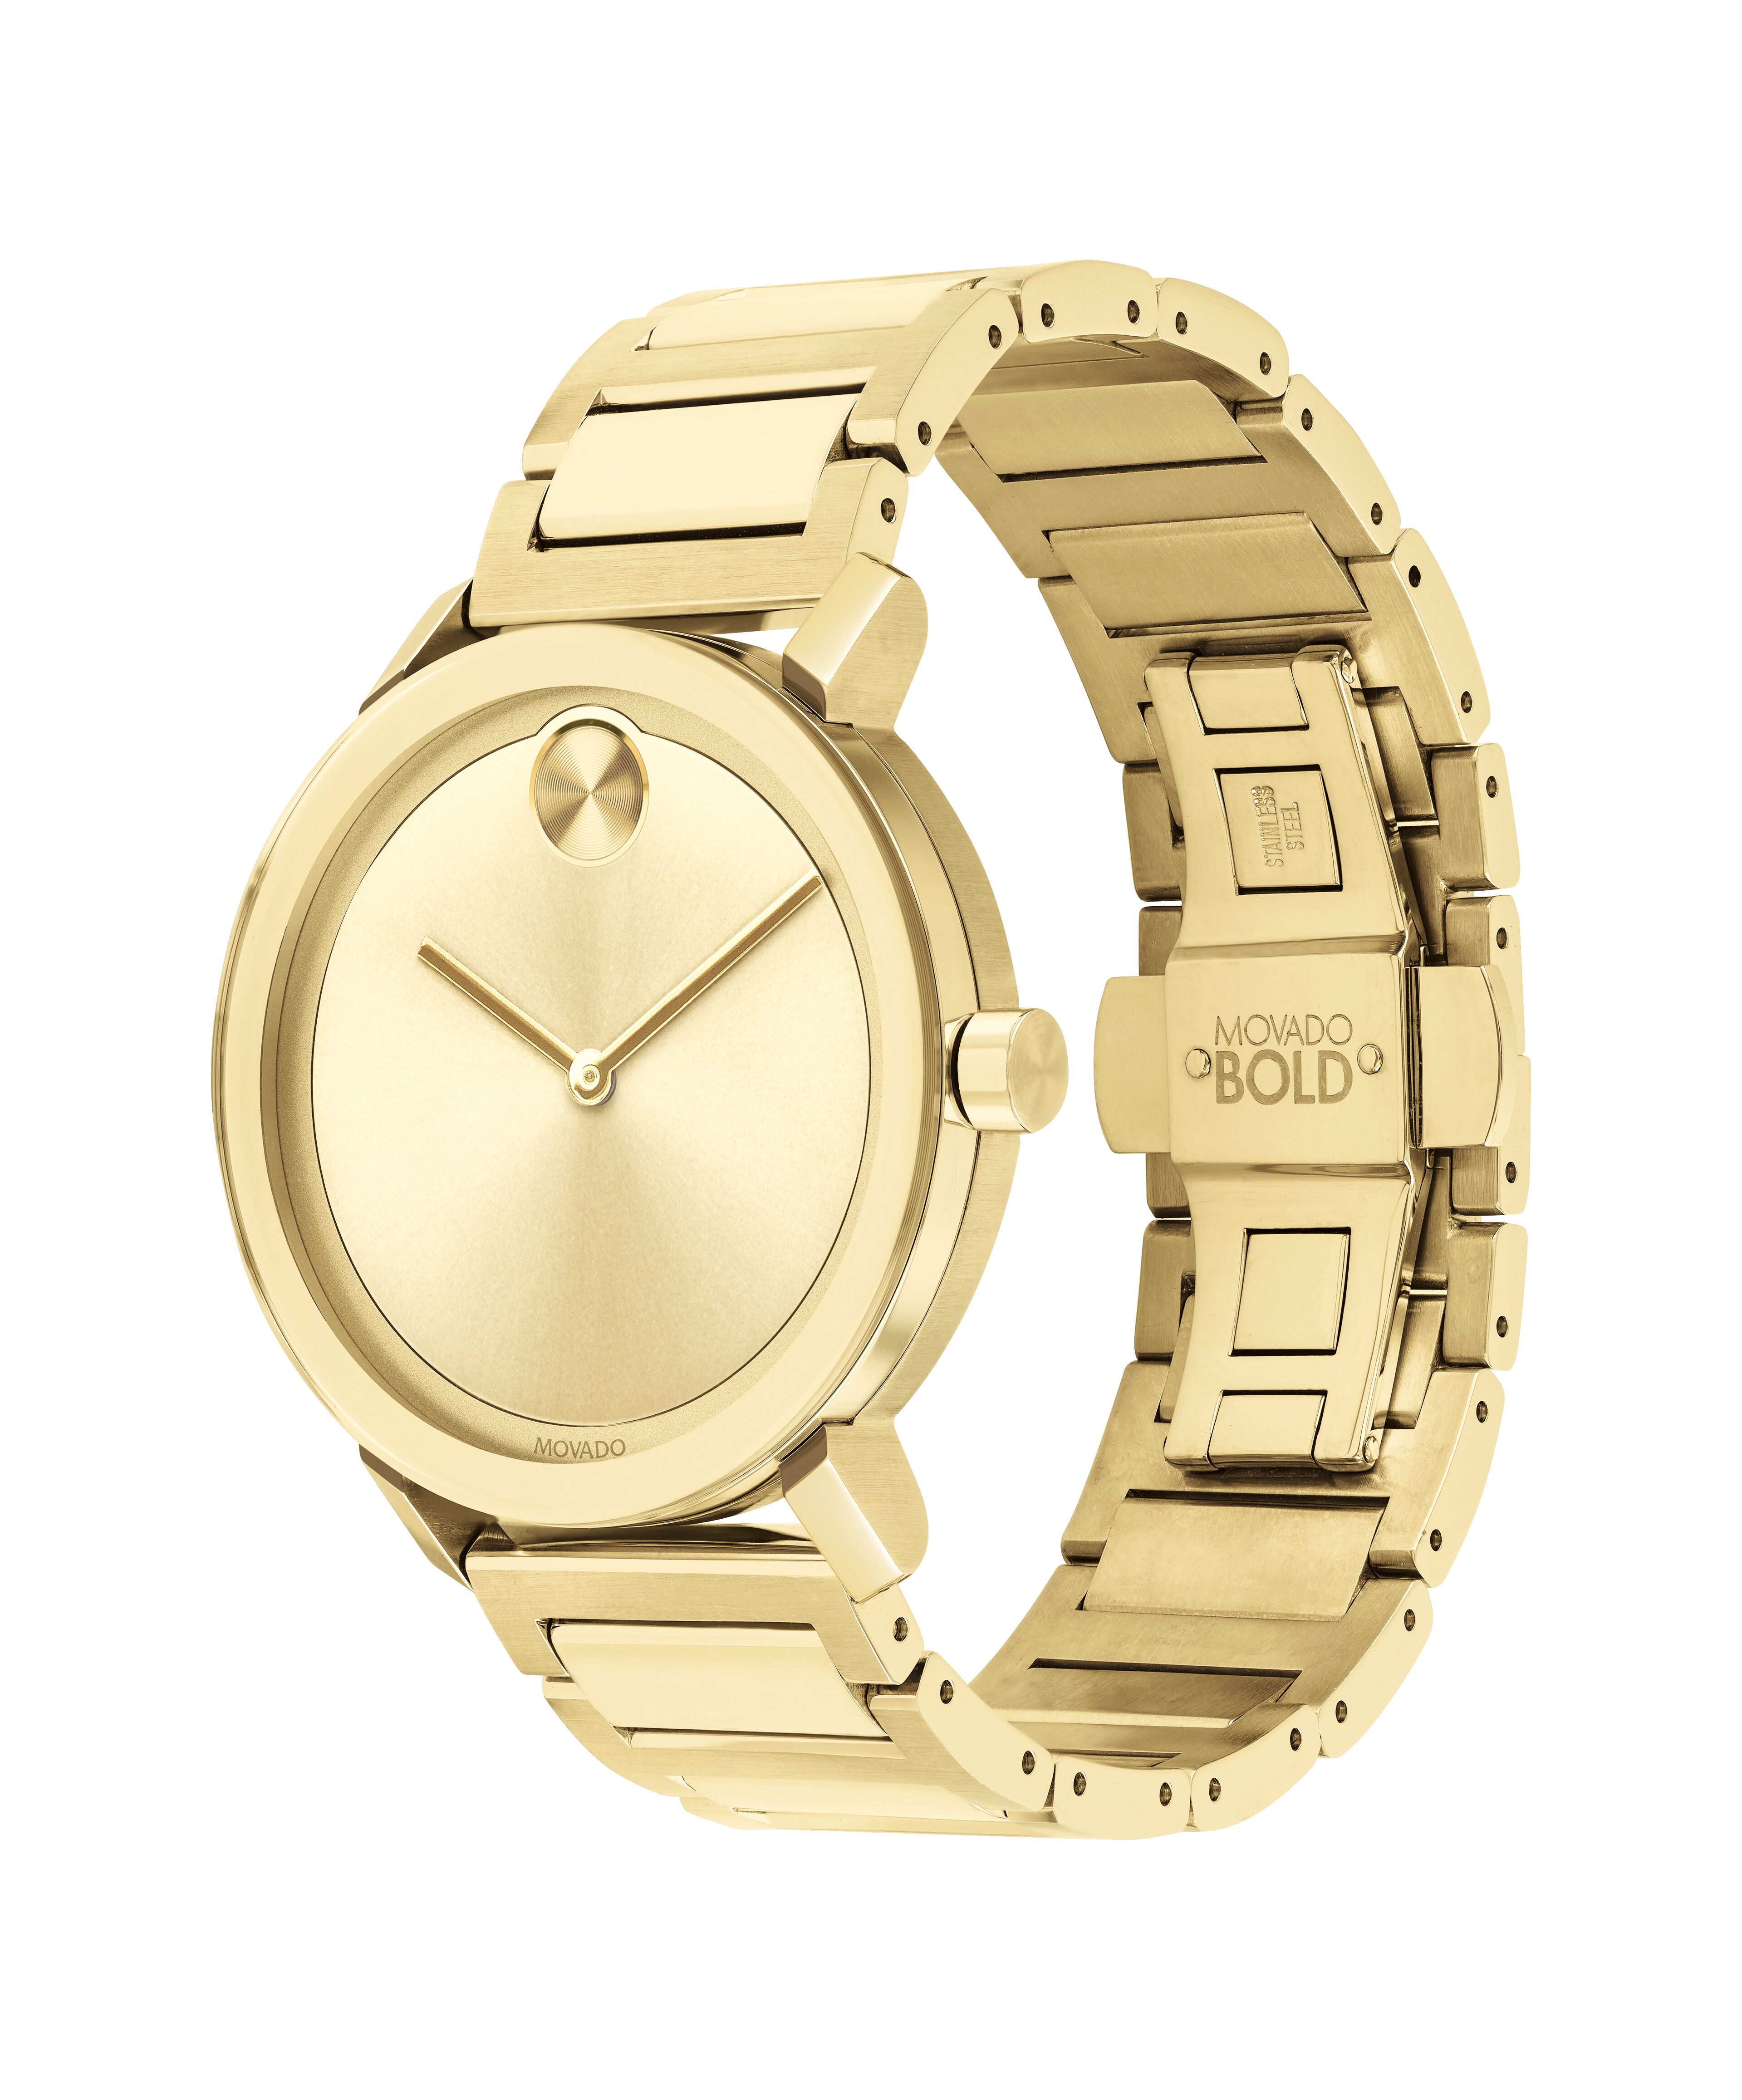 Movado Ultra Slim Yellow Gold Plated Leather Strap Women's Watch 0607157Movado VINTAGE